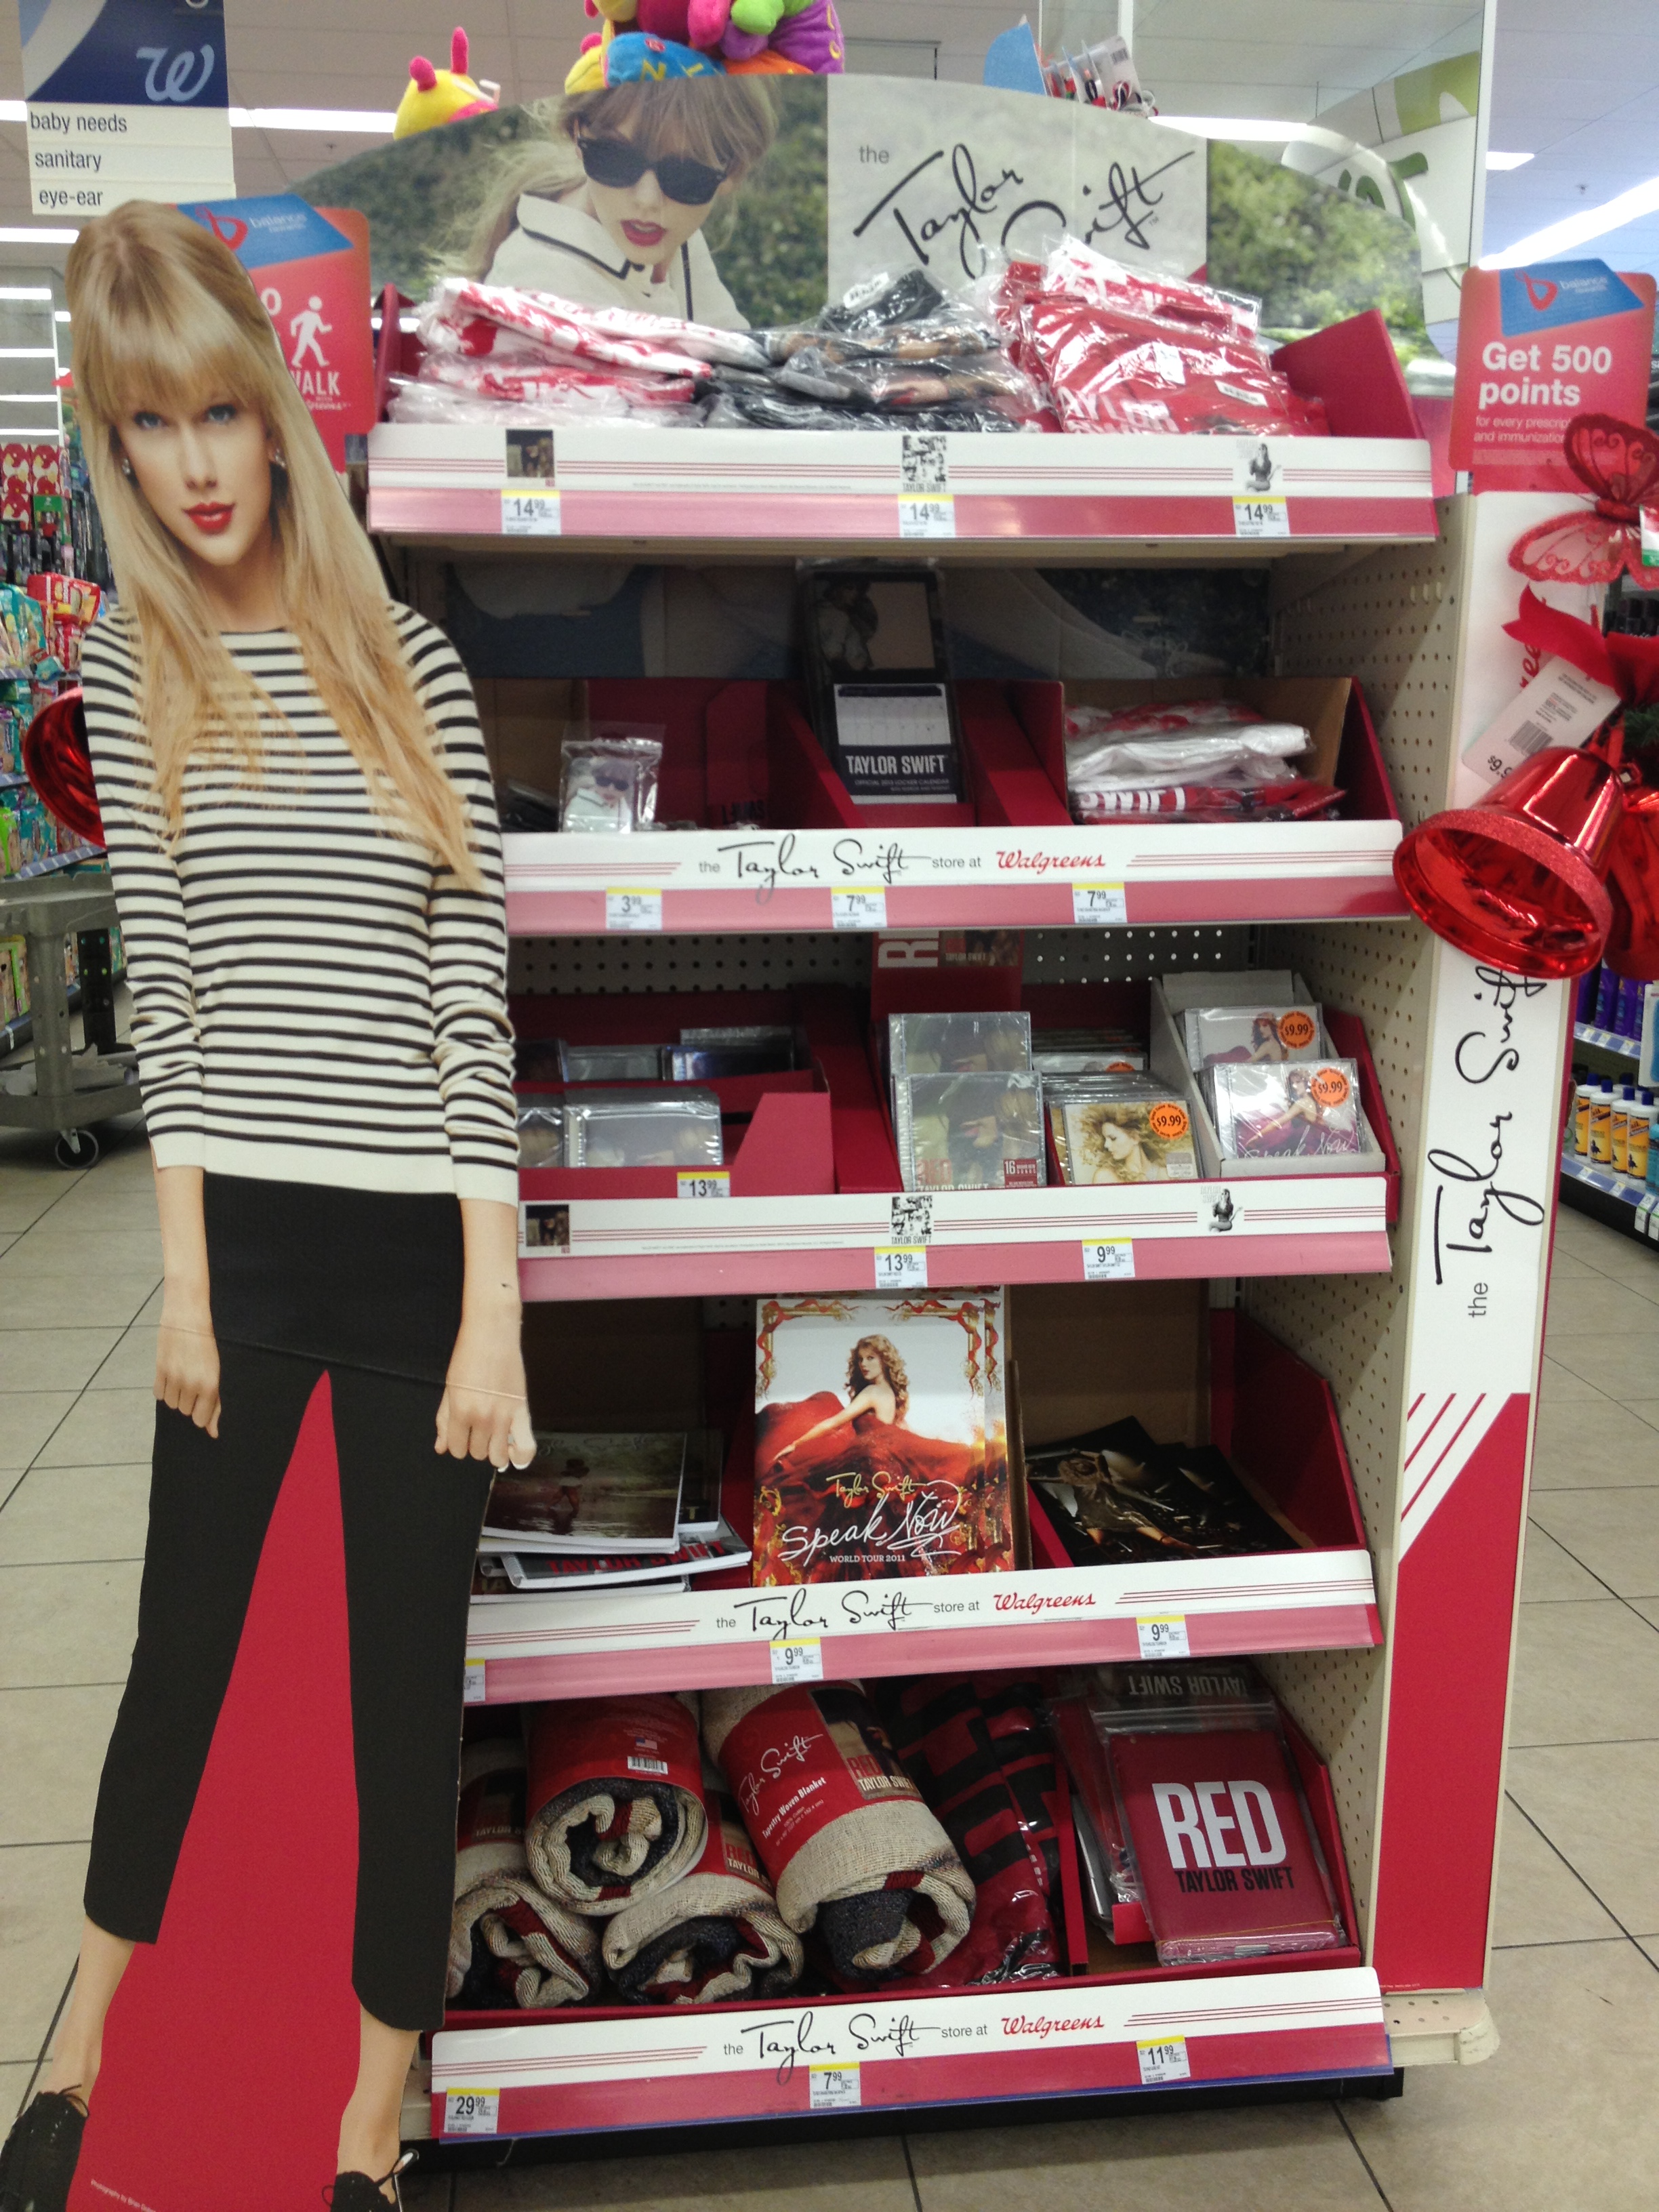 Taylor Swift Merchandise Exclusively at Walgreens | dtlalifestyle